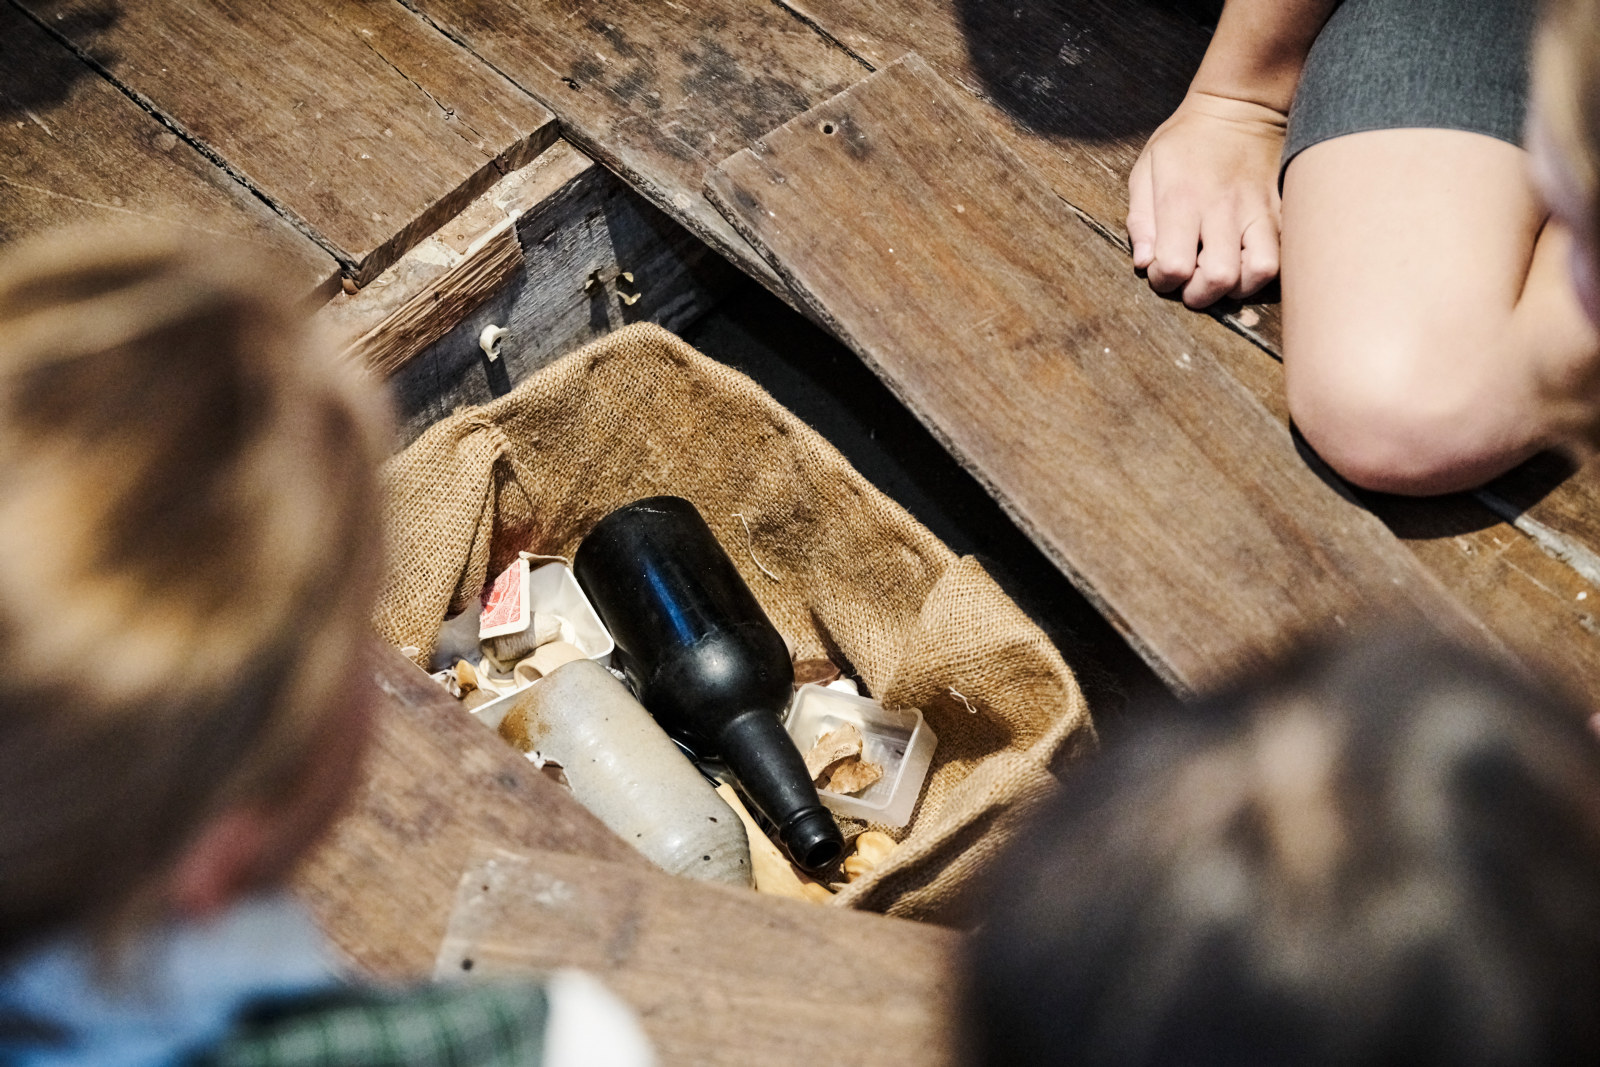 Students examining archaeology on the Home: Convicts, Migrants & First People Learning program at Hyde Park Barracks